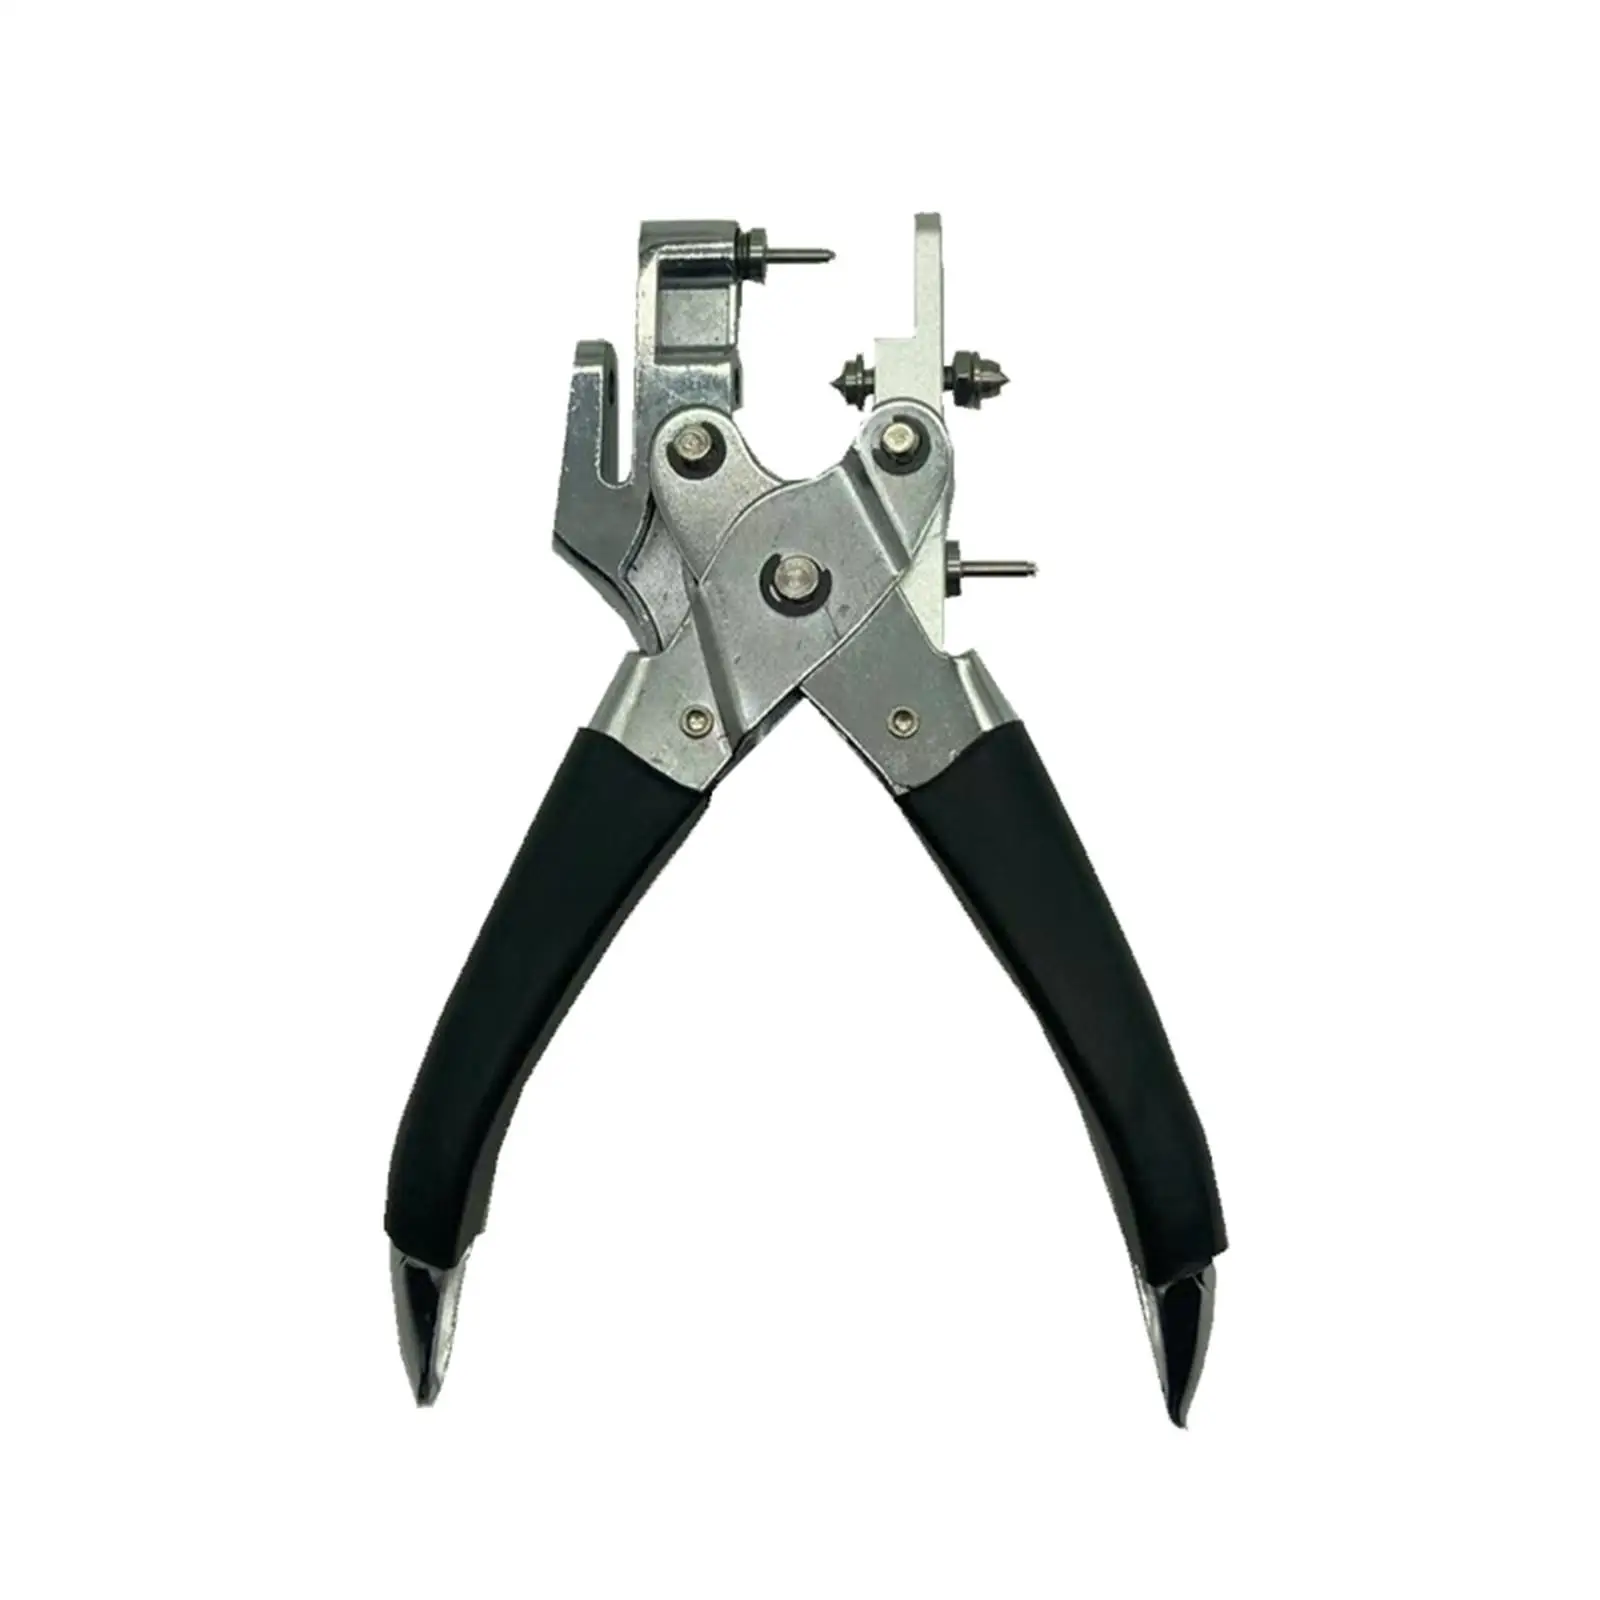 Badminton Machine String Plier Removal Install Eyelet Racquet Sports Grommets Pliers Tennis Racquet Badminton String Clamp